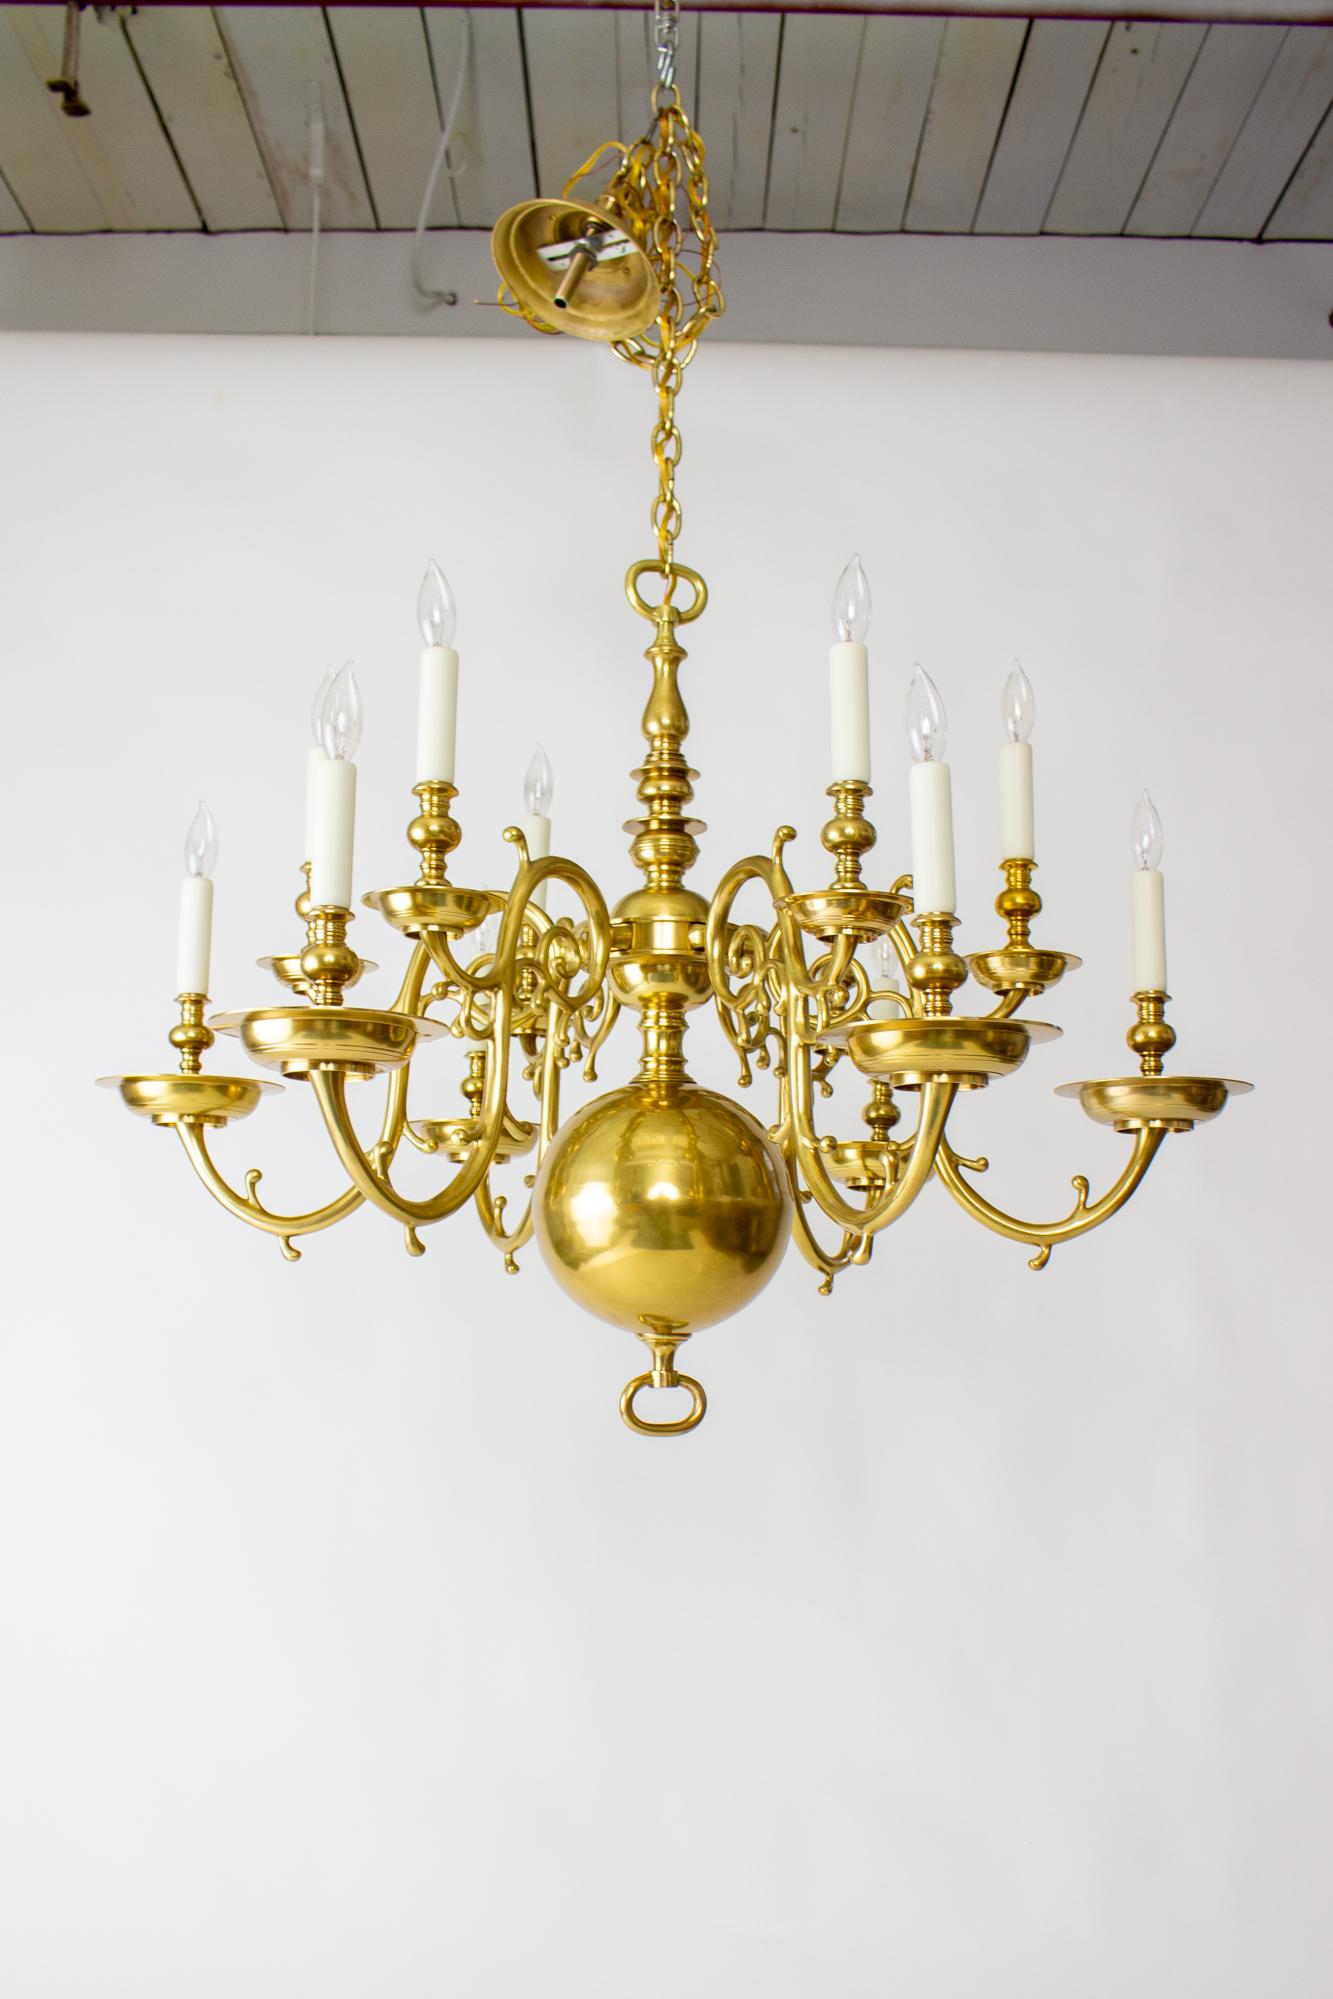 American Classical 20th Century 12 Arm Dutch Colonial Brass Chandelier For Sale